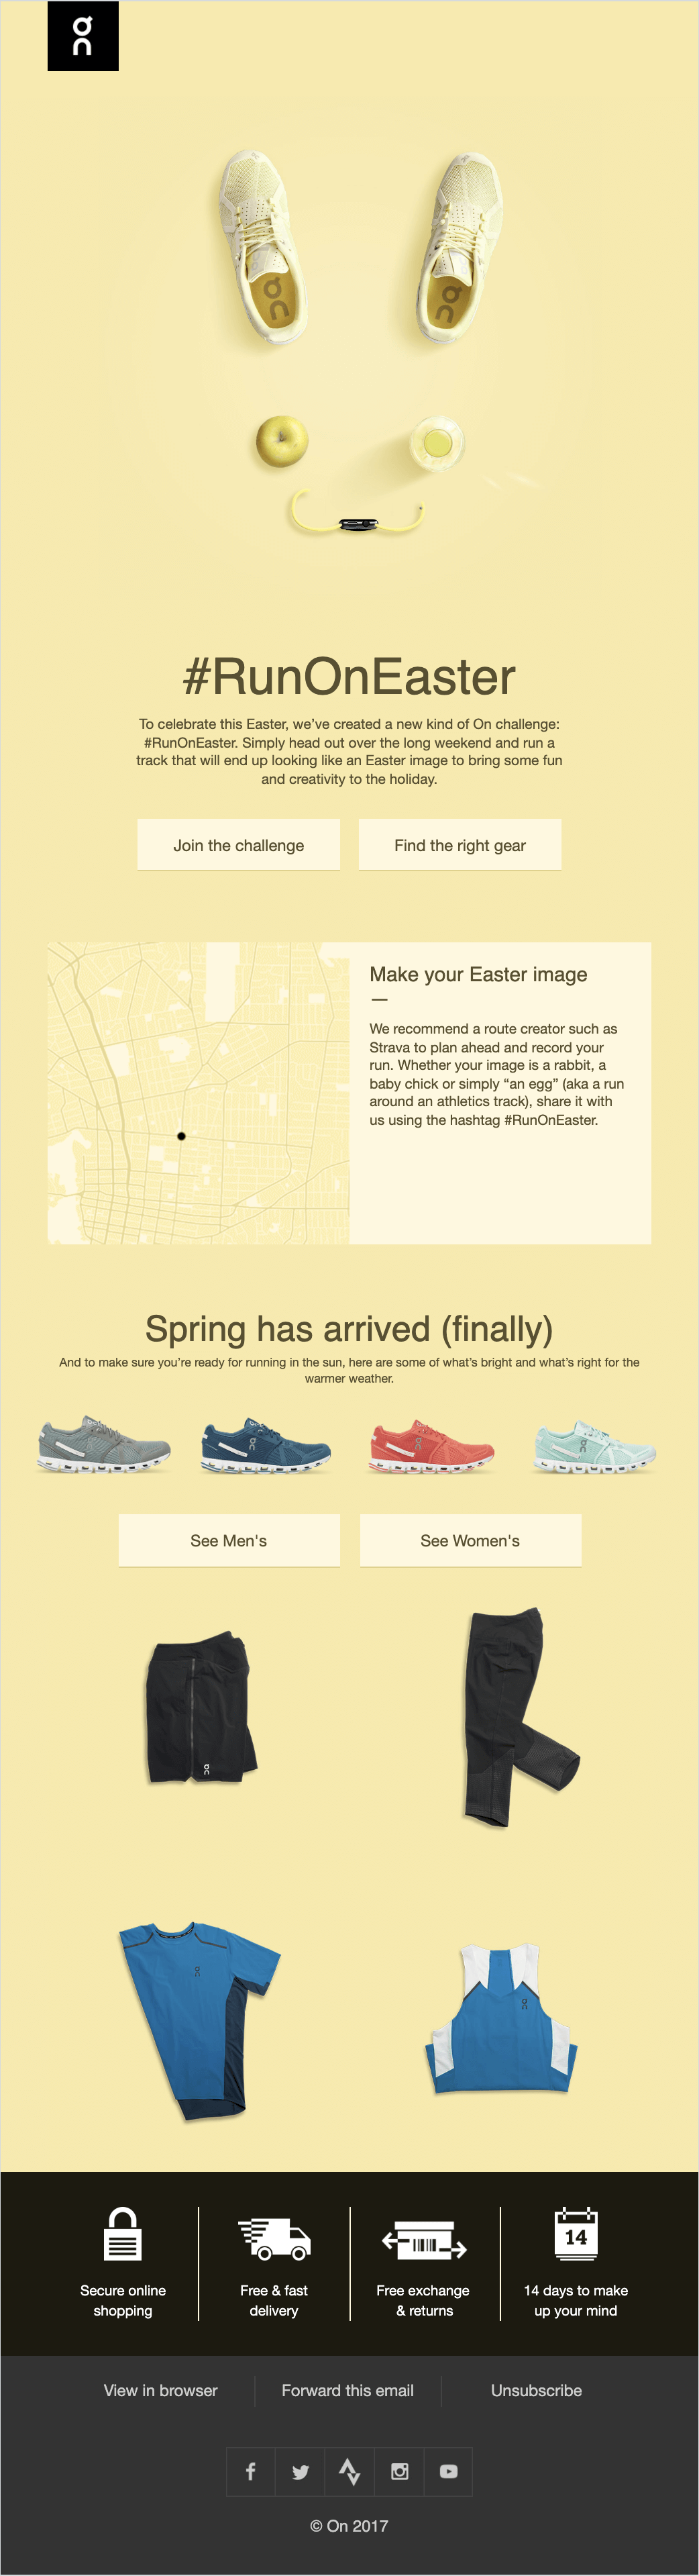 Easter Email Example by On Running